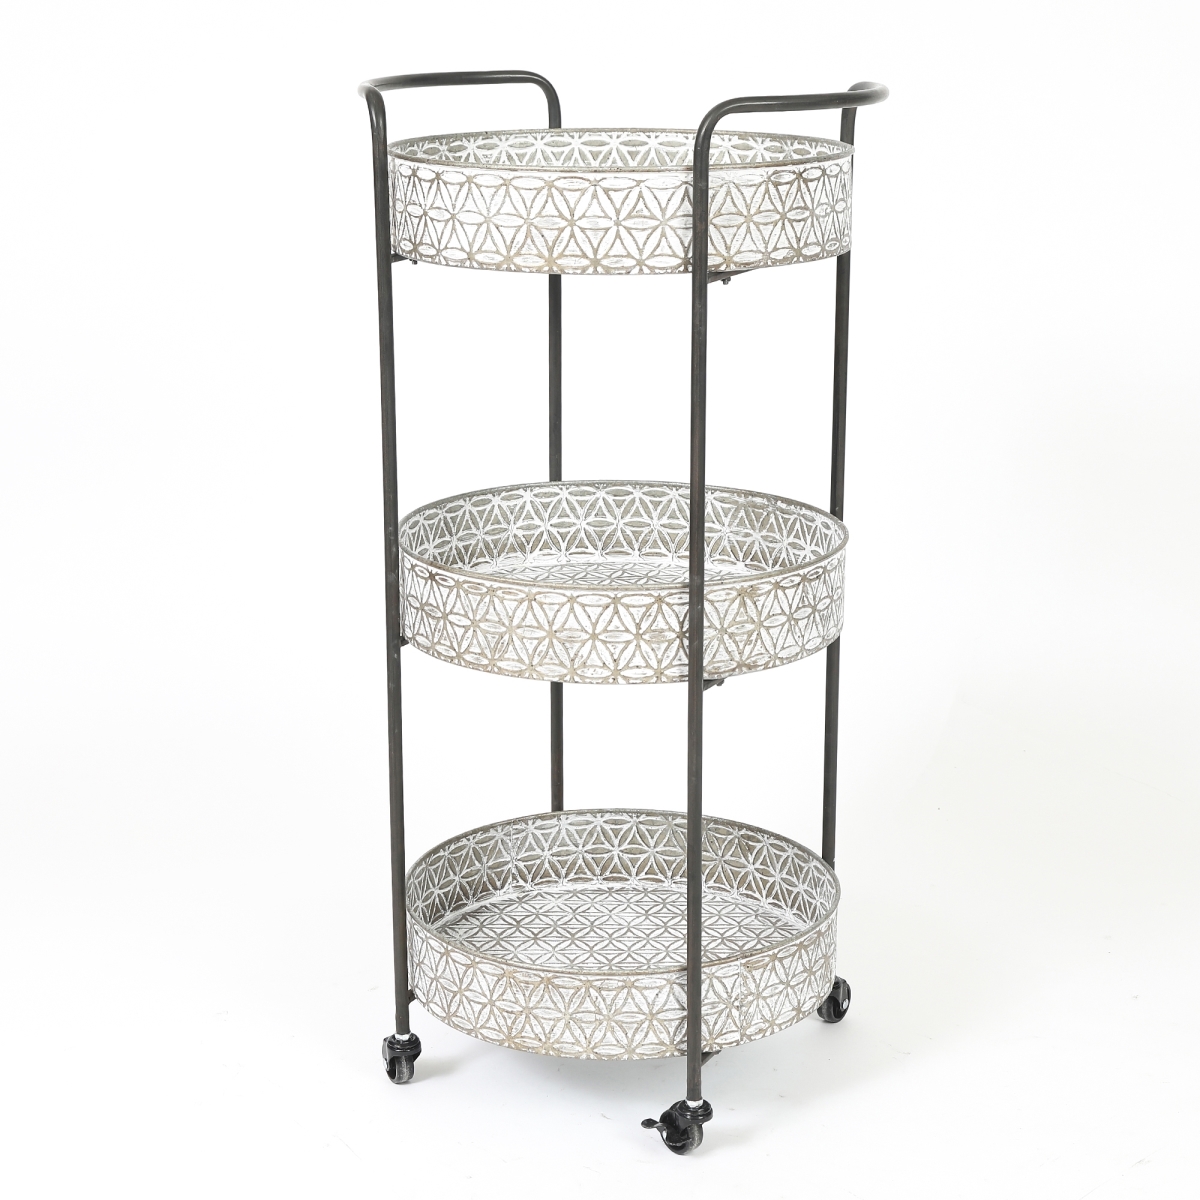 Luxen Home Whif523 Metal Oval Three Tier Rolling Cart In Galvanized Finish